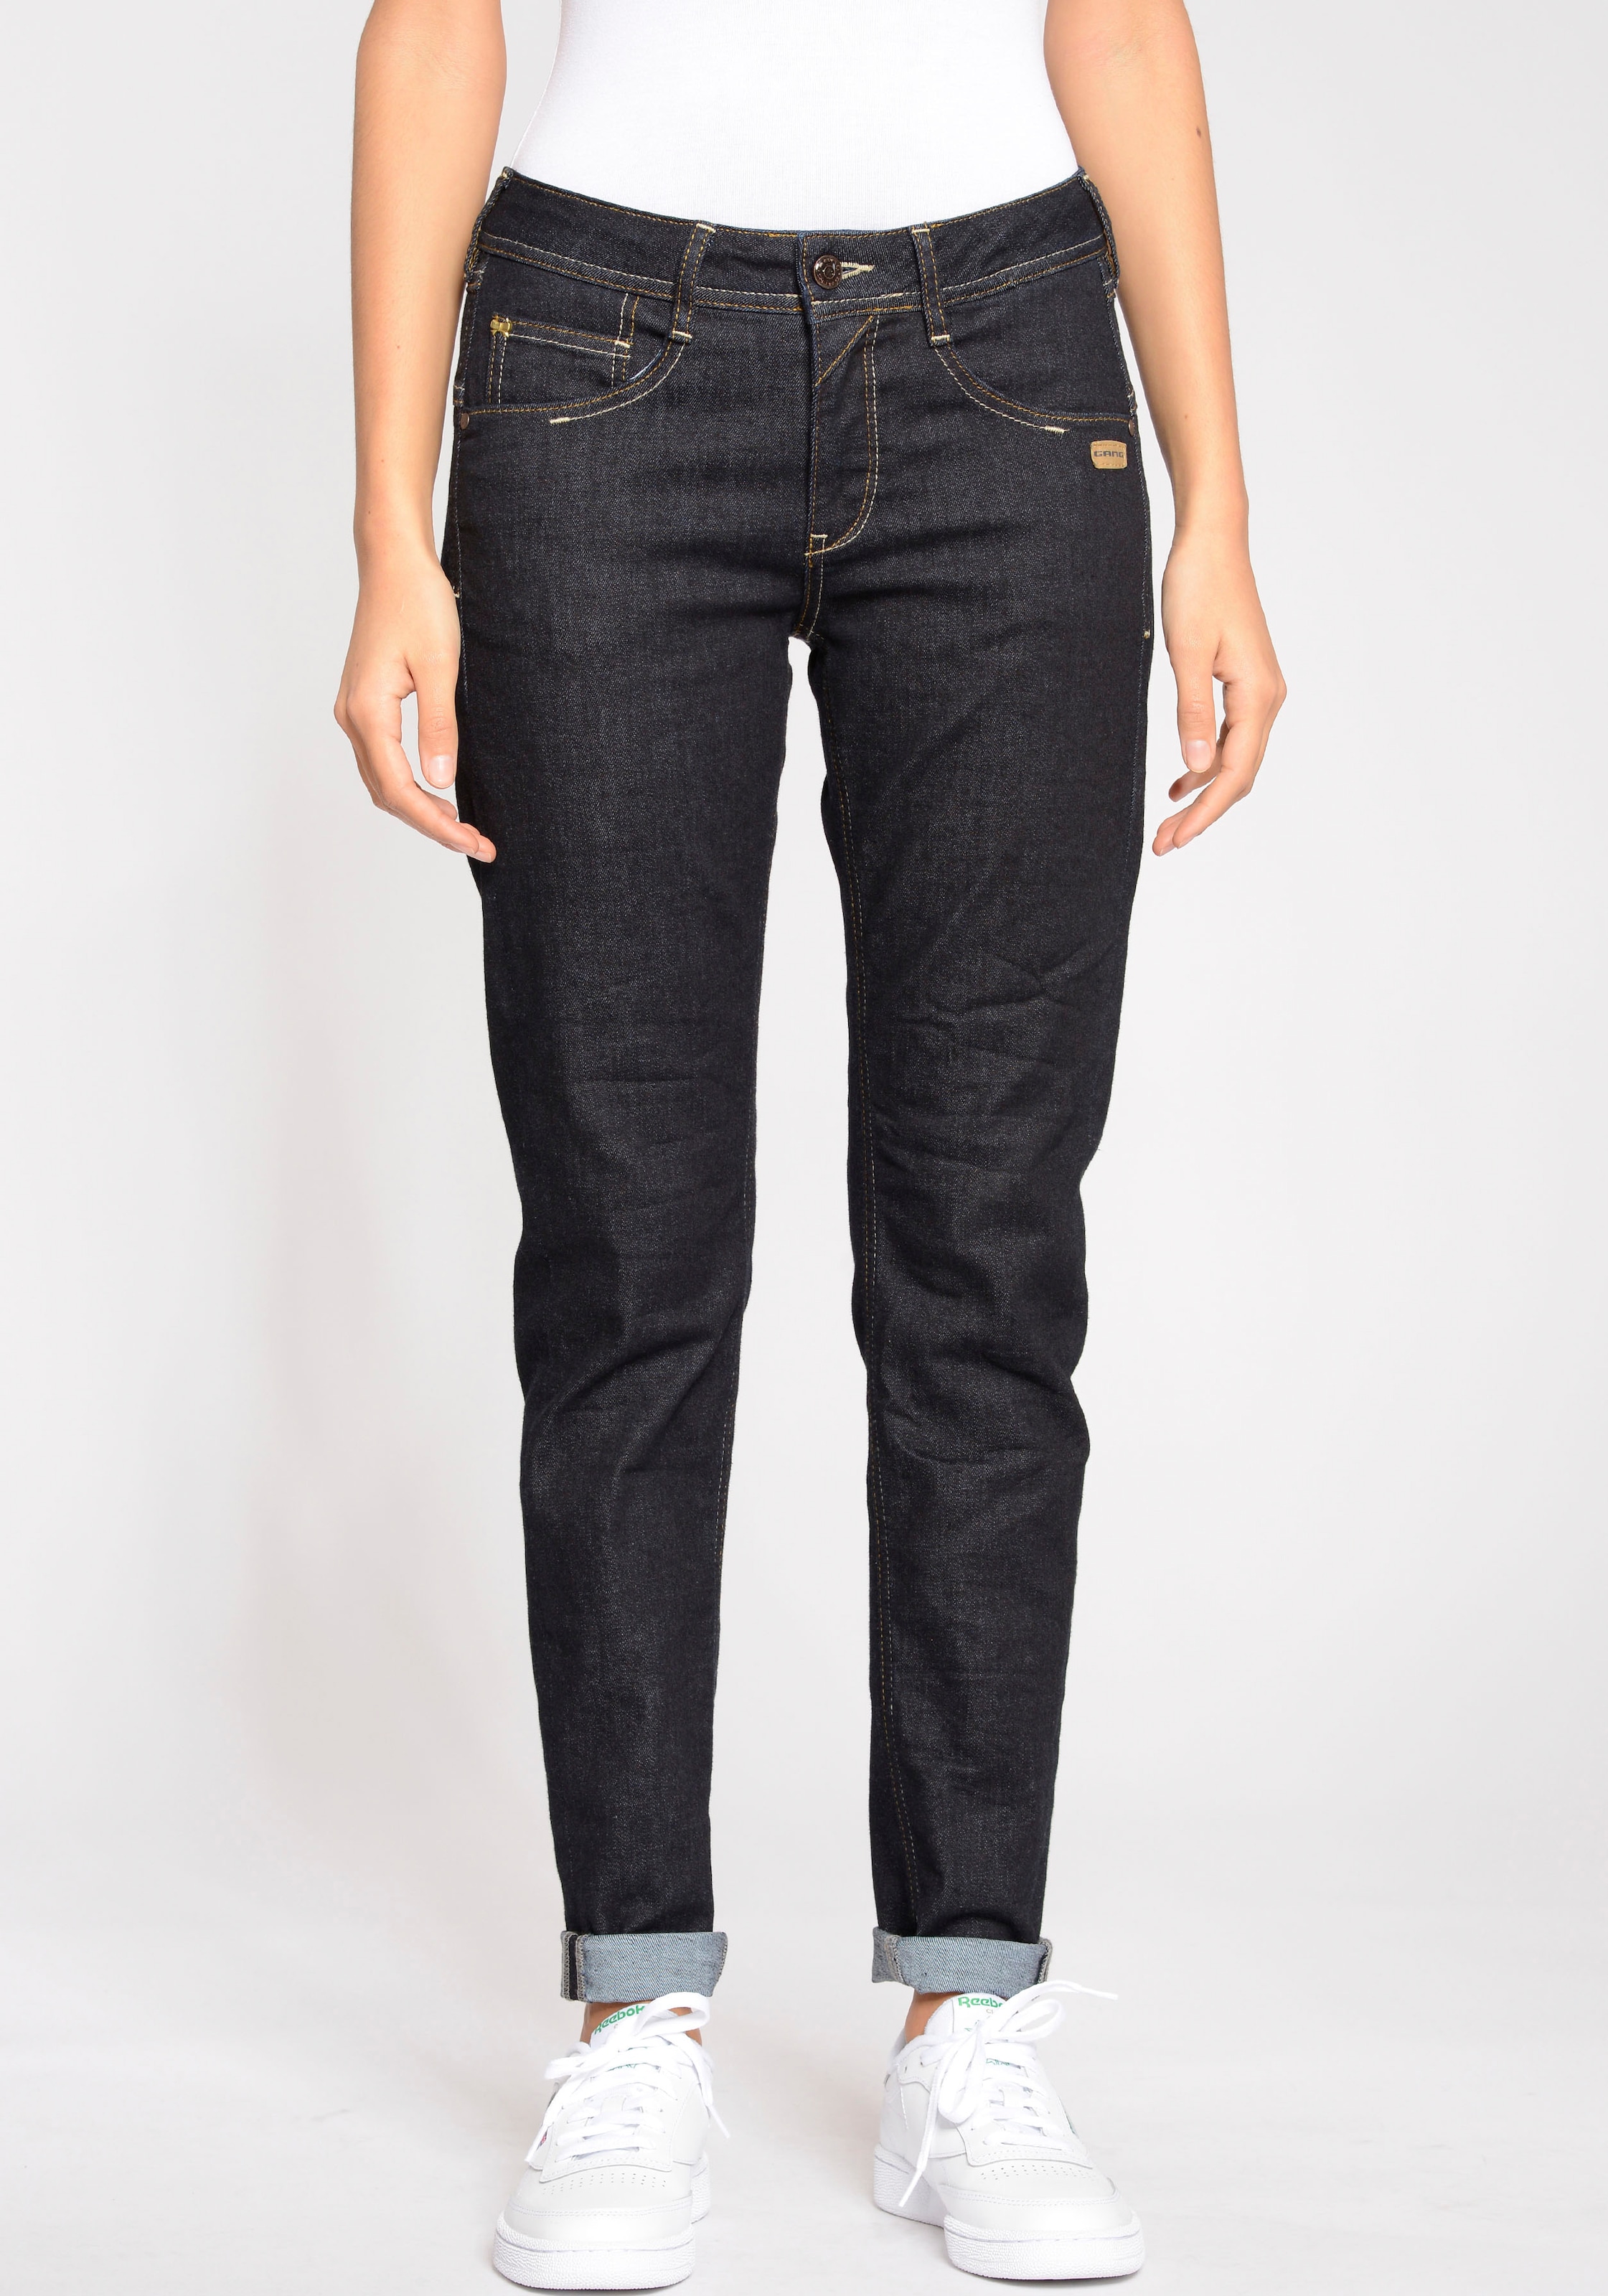 mit Relax-fit-Jeans OTTO »94Amelie Shop GANG Fit«, Online Relaxed im Used-Effekten